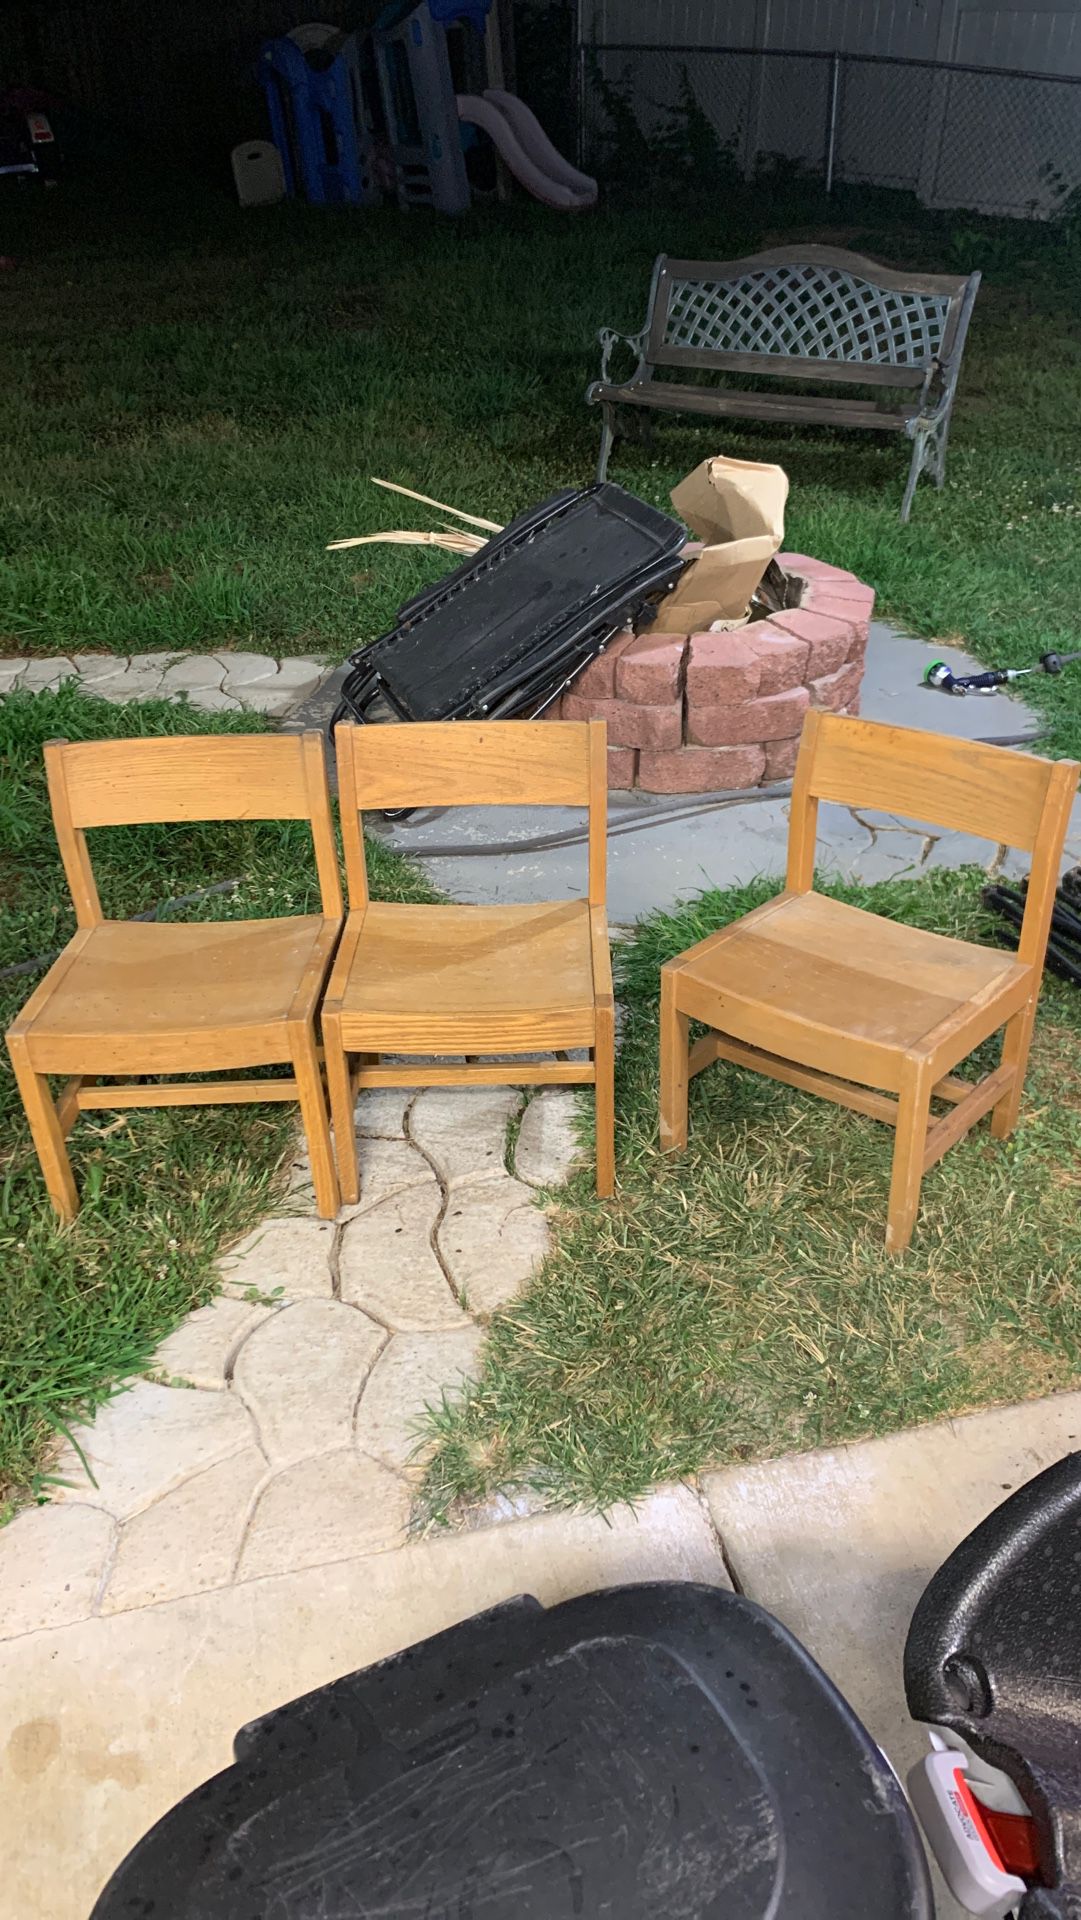 Children solid wood chair (3 chairs) for sale $5 each